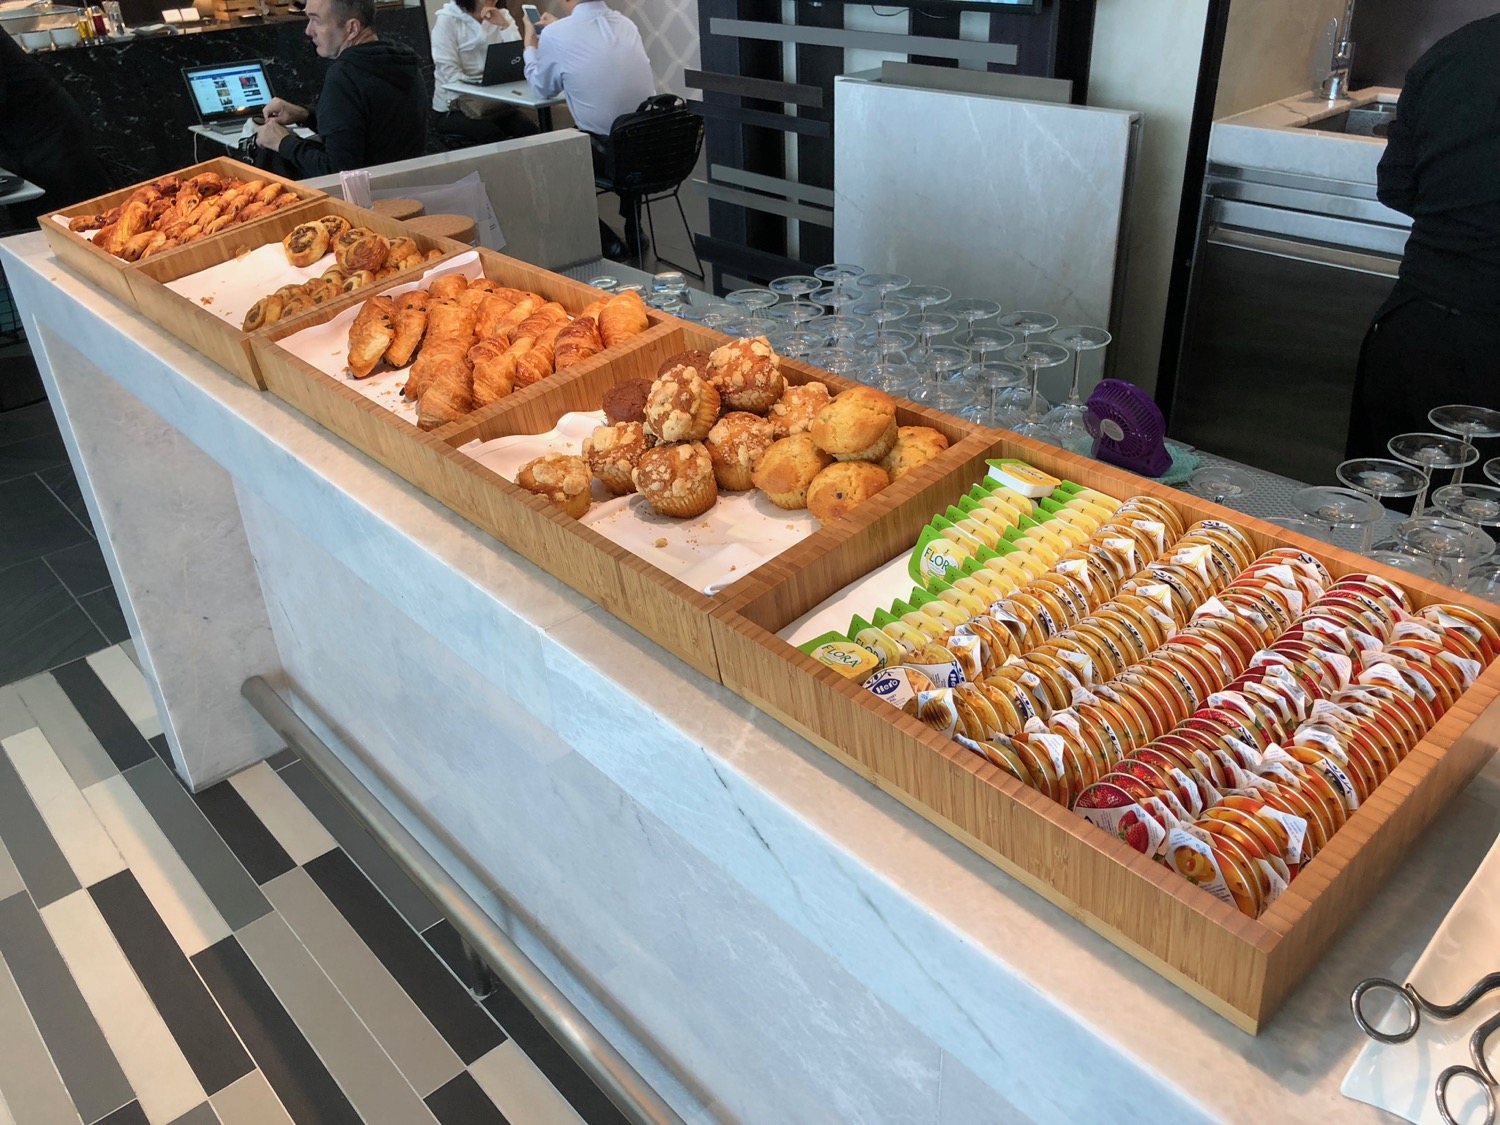 a row of trays of pastries